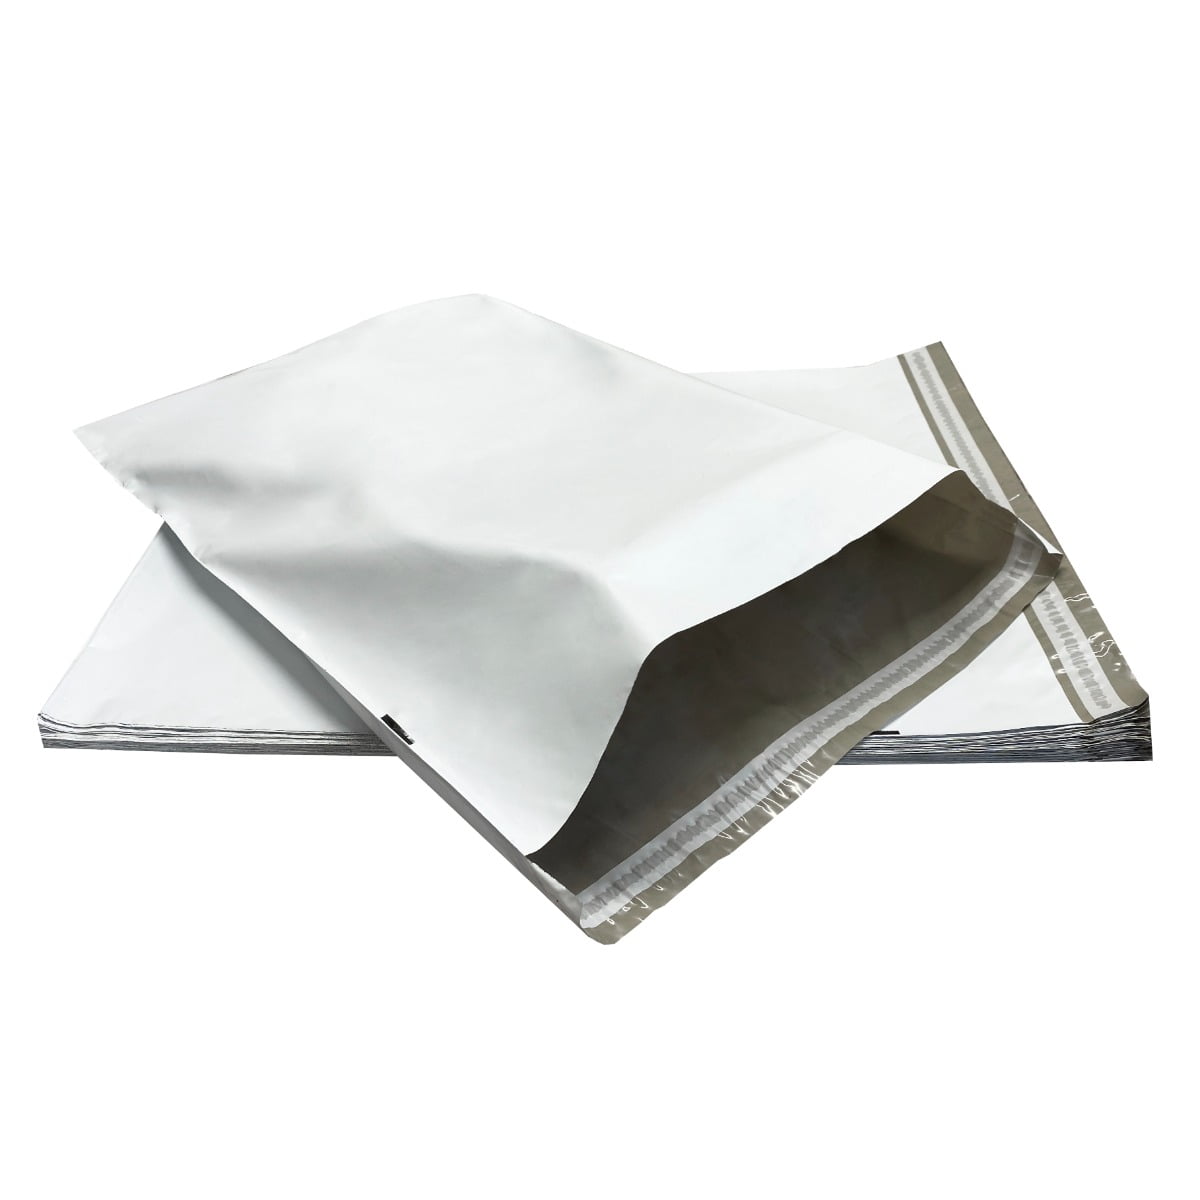 19x24 BLACK POLY MAILERS Shipping Envelopes Self Sealing Mailing Bags 19" x 24" 